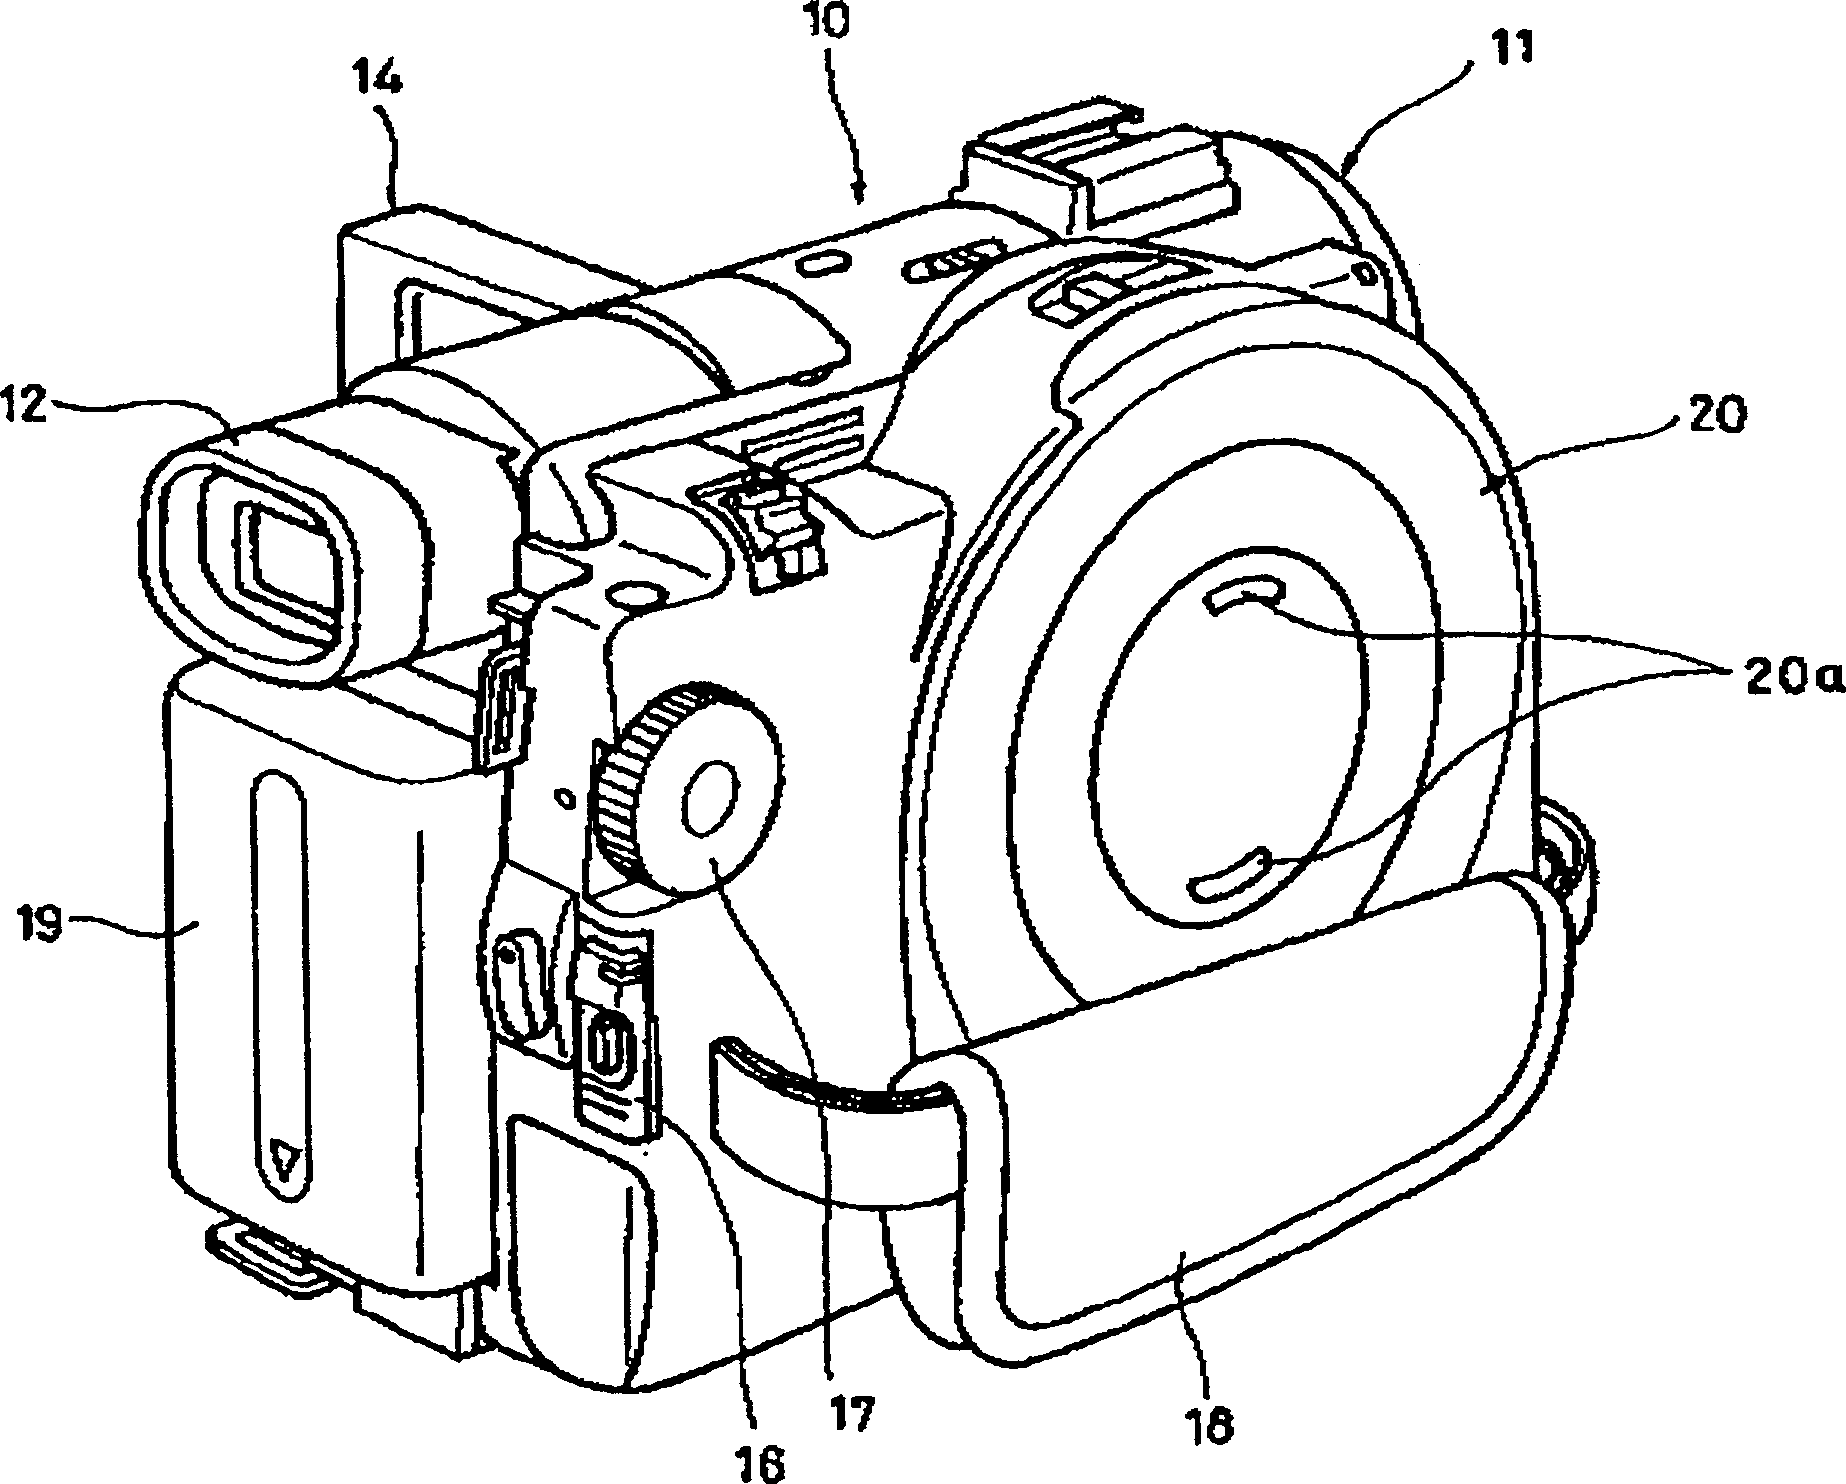 Pantype photographing device